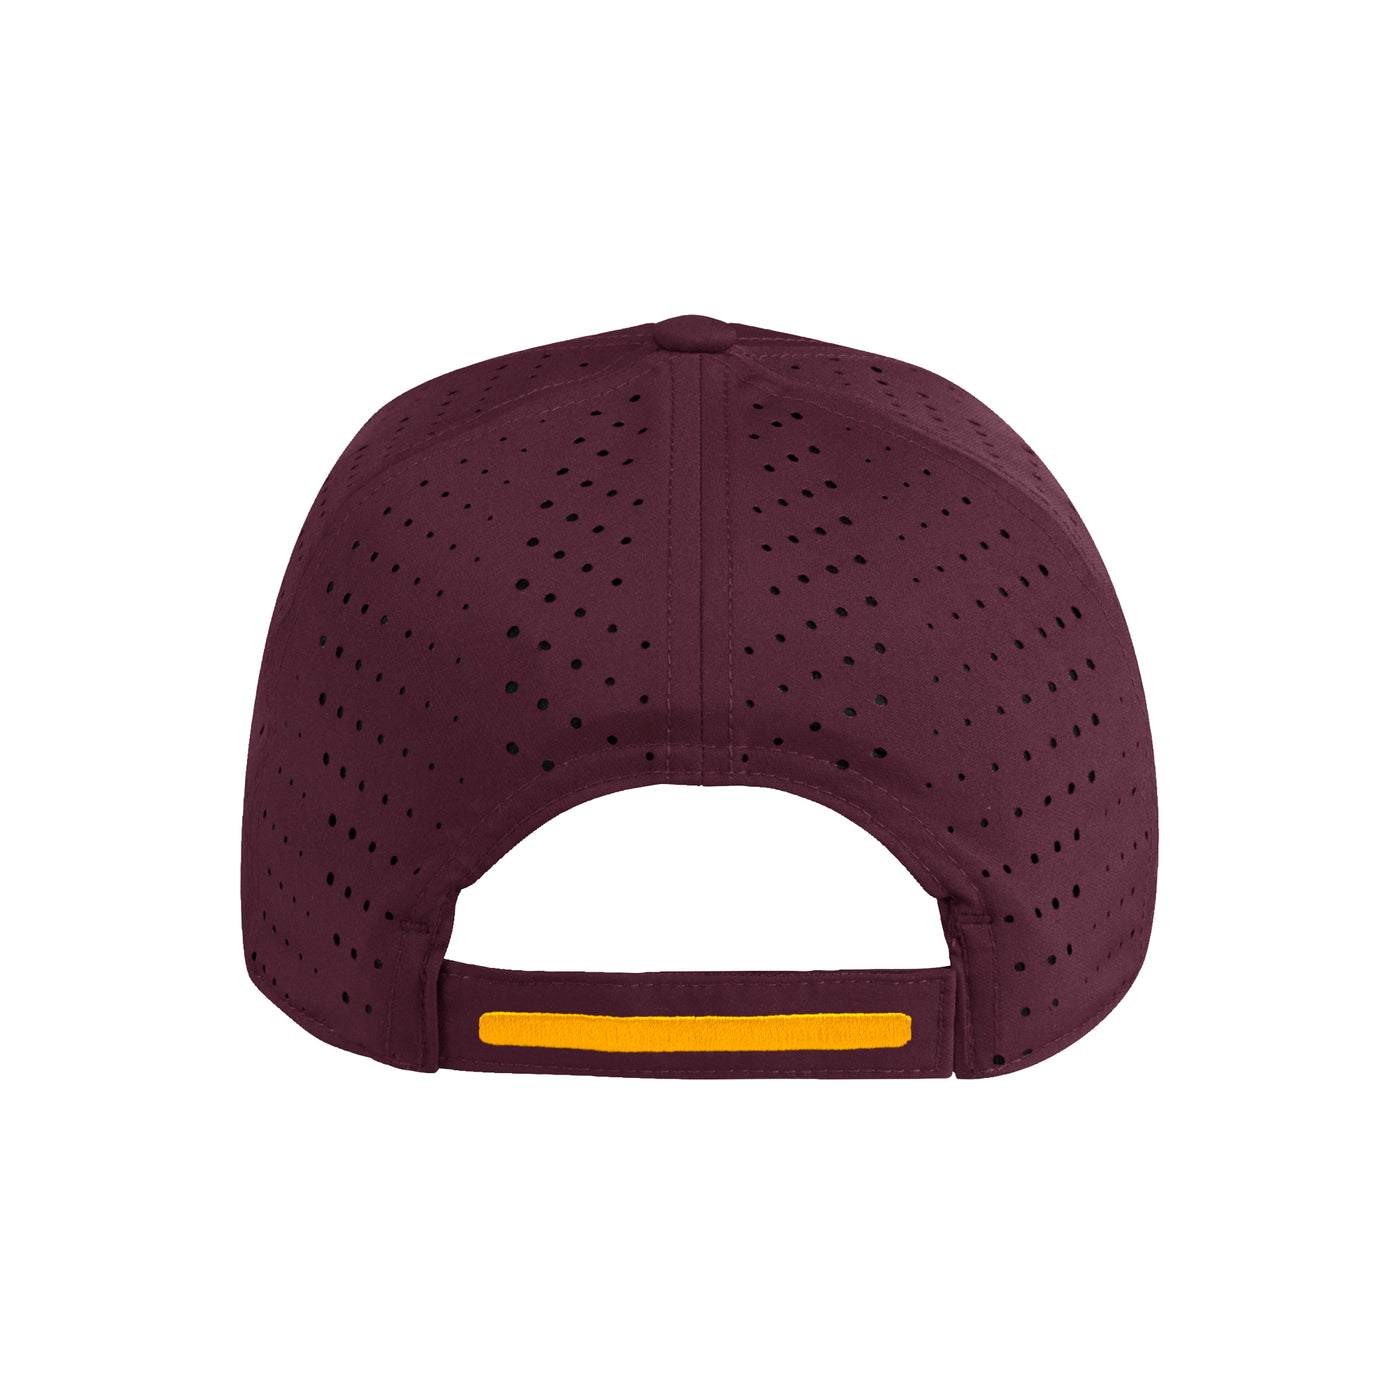 Back view of ASU maroon hat with adjustable velcro strap